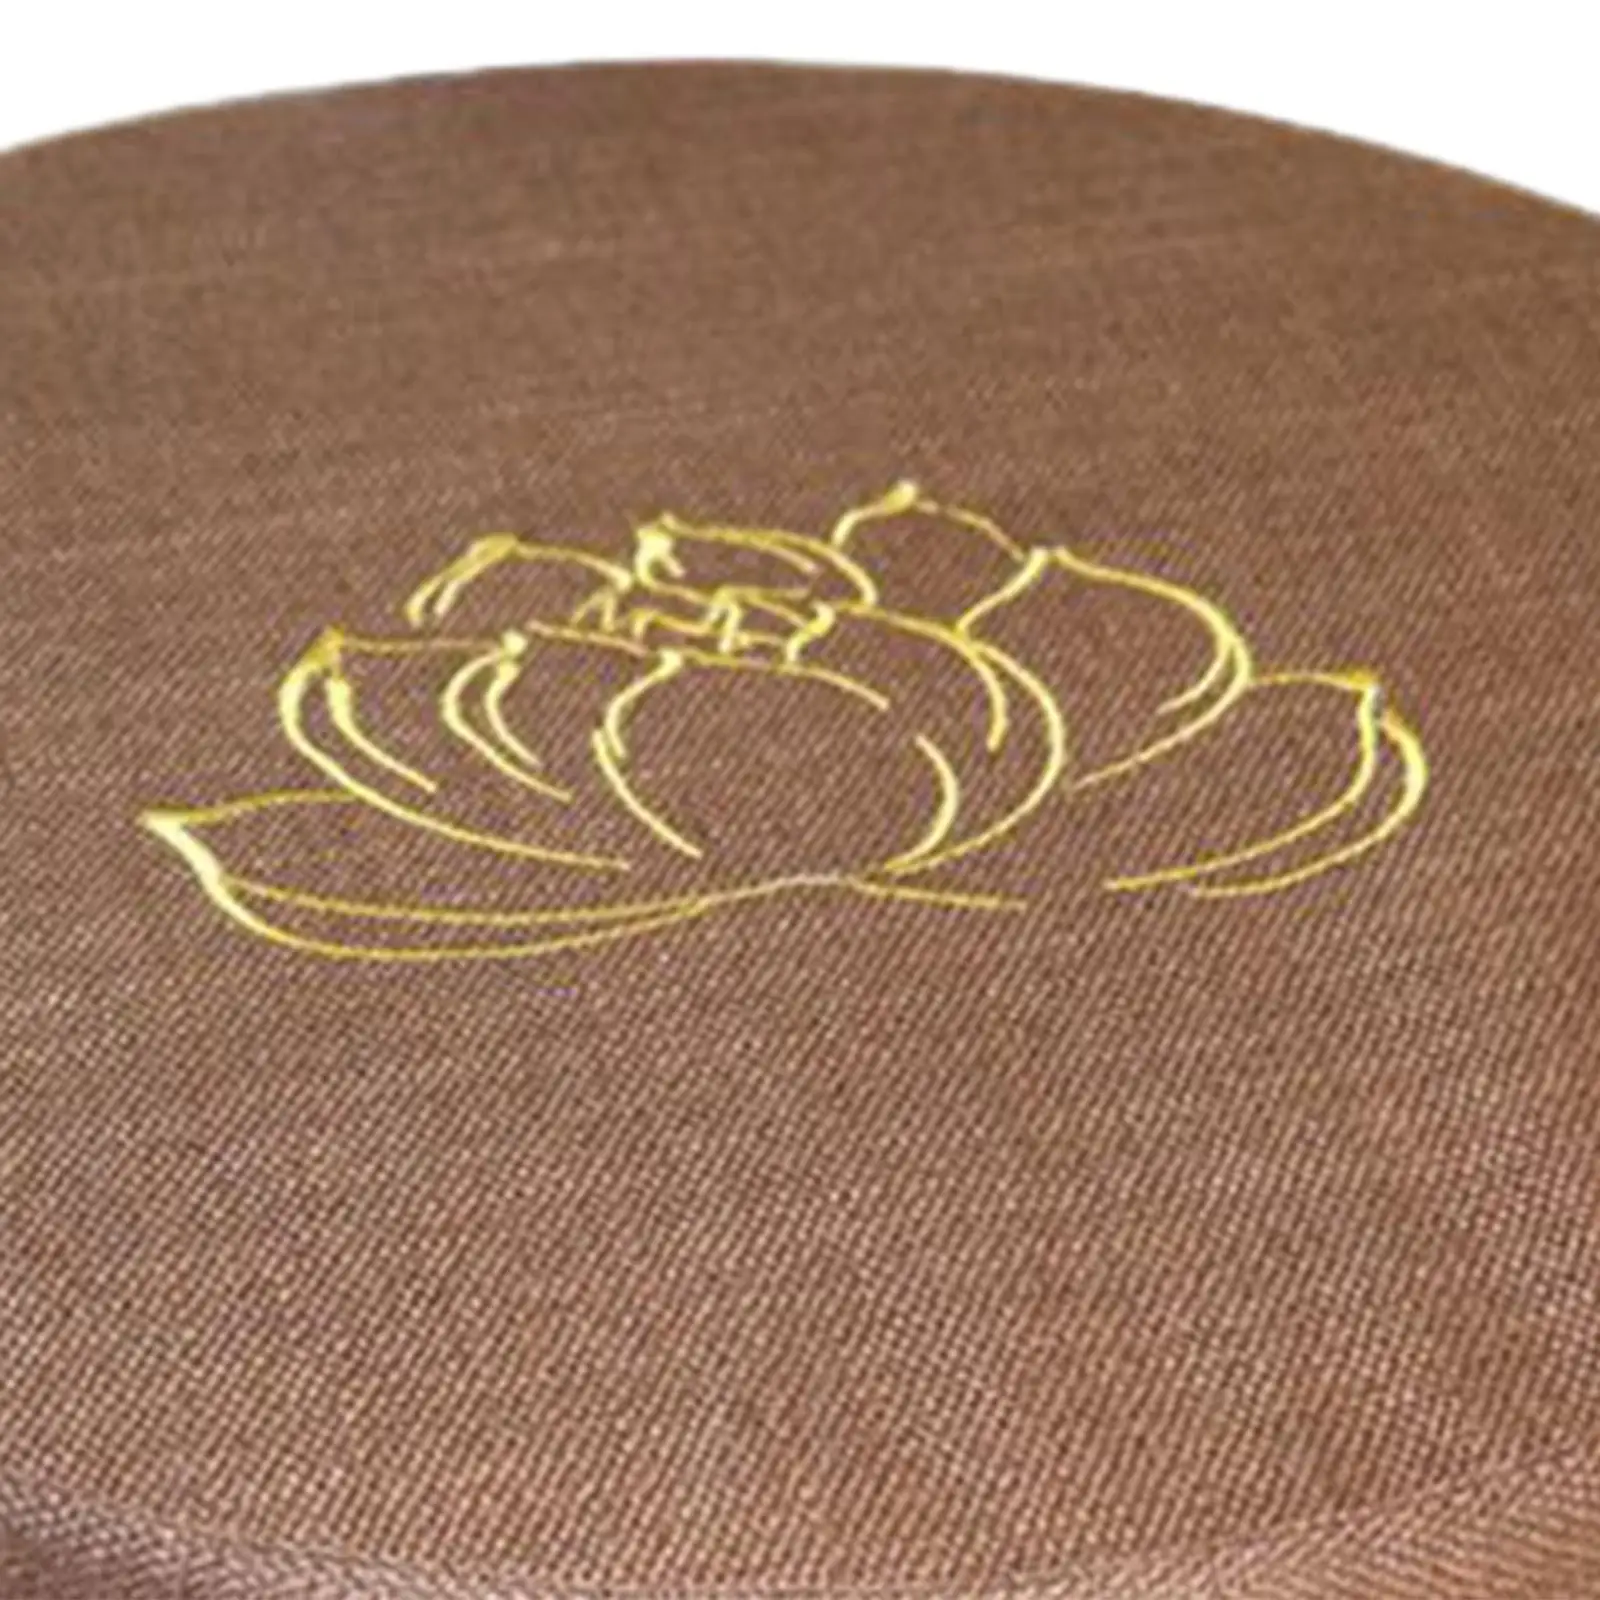 Comfortable Seating Cushion for Meditation and Yoga - Perfect for Home Decor and Indoor Relaxation